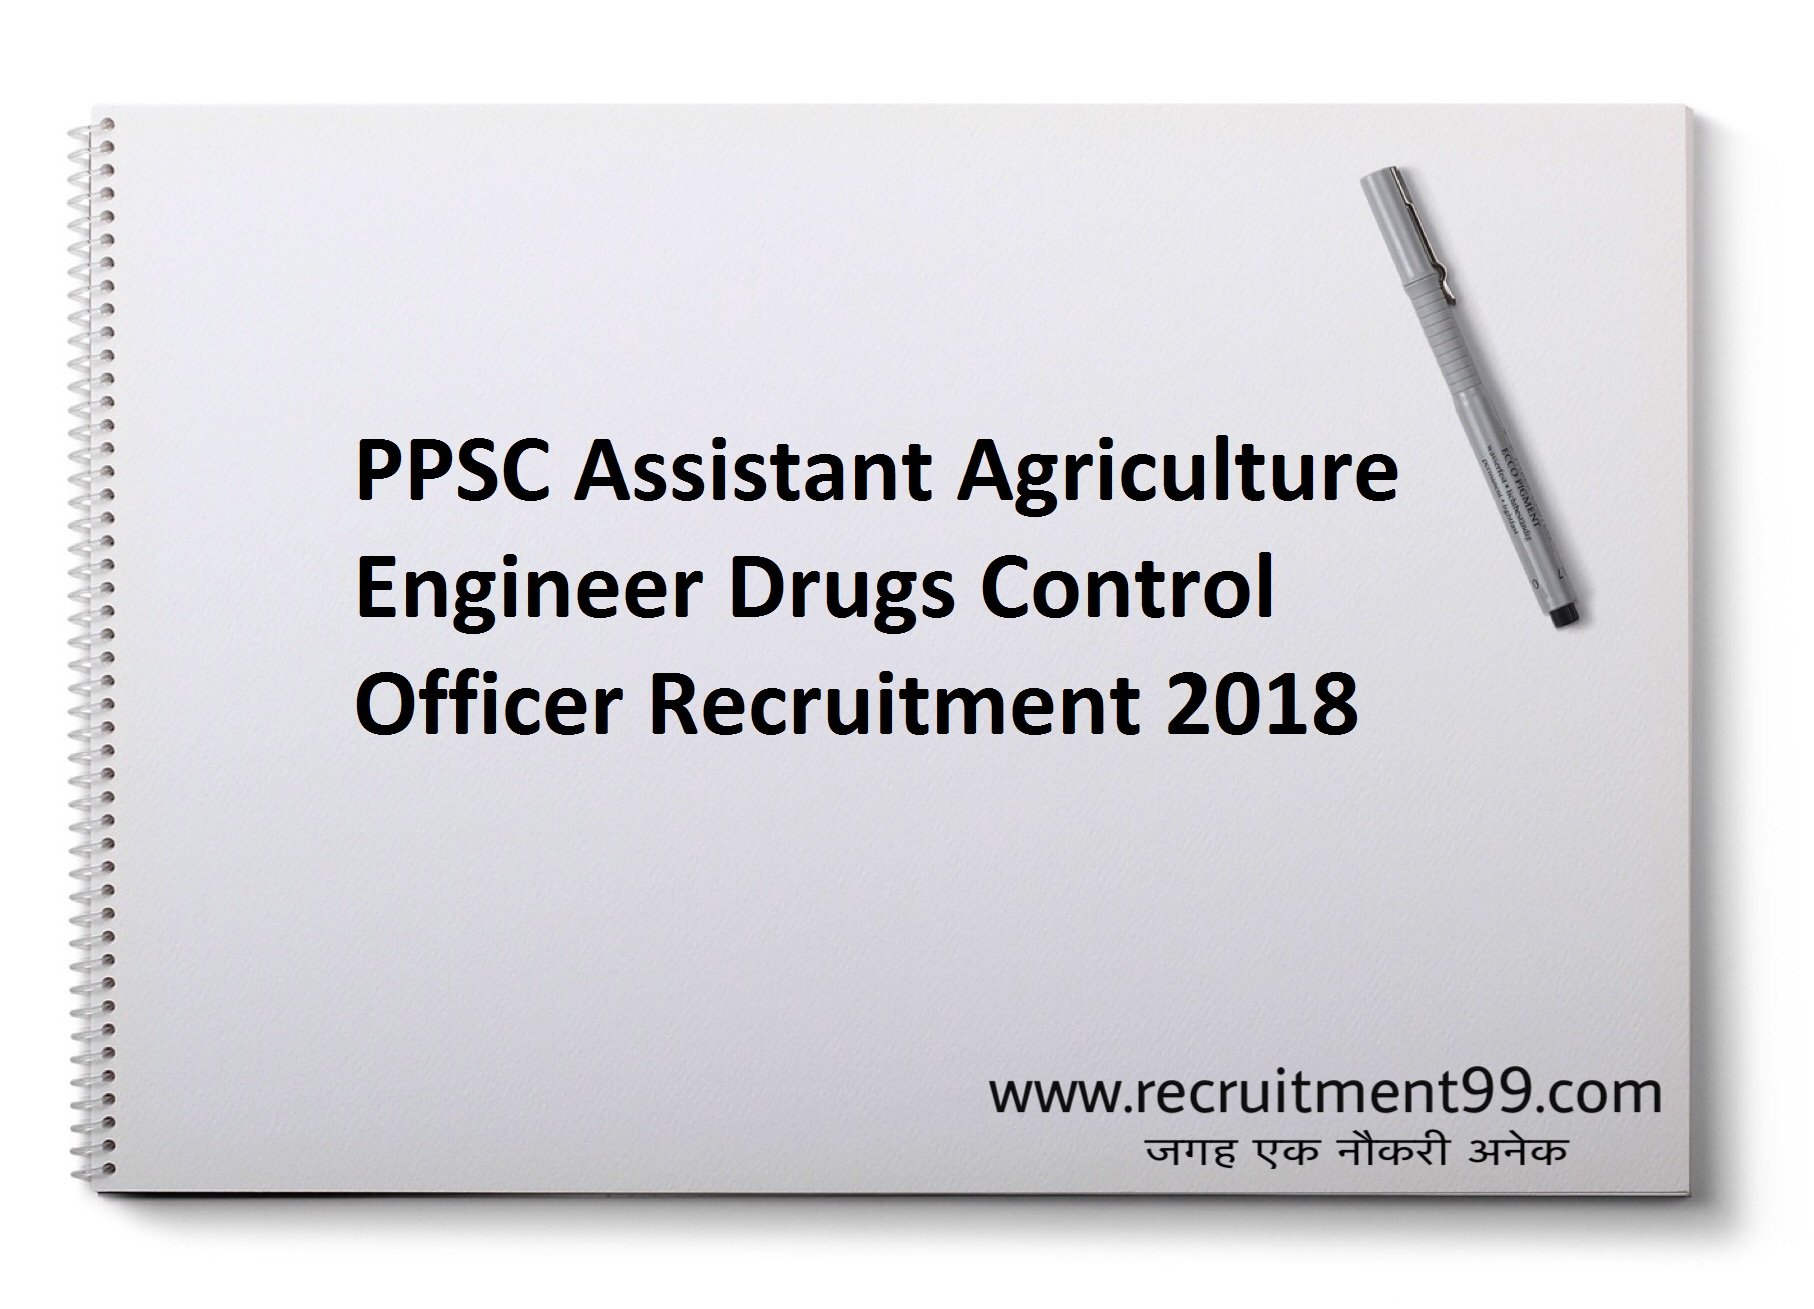 PPSC Assistant Agriculture Engineer Drugs Control Officer Recruitment Admit Card Result 2018